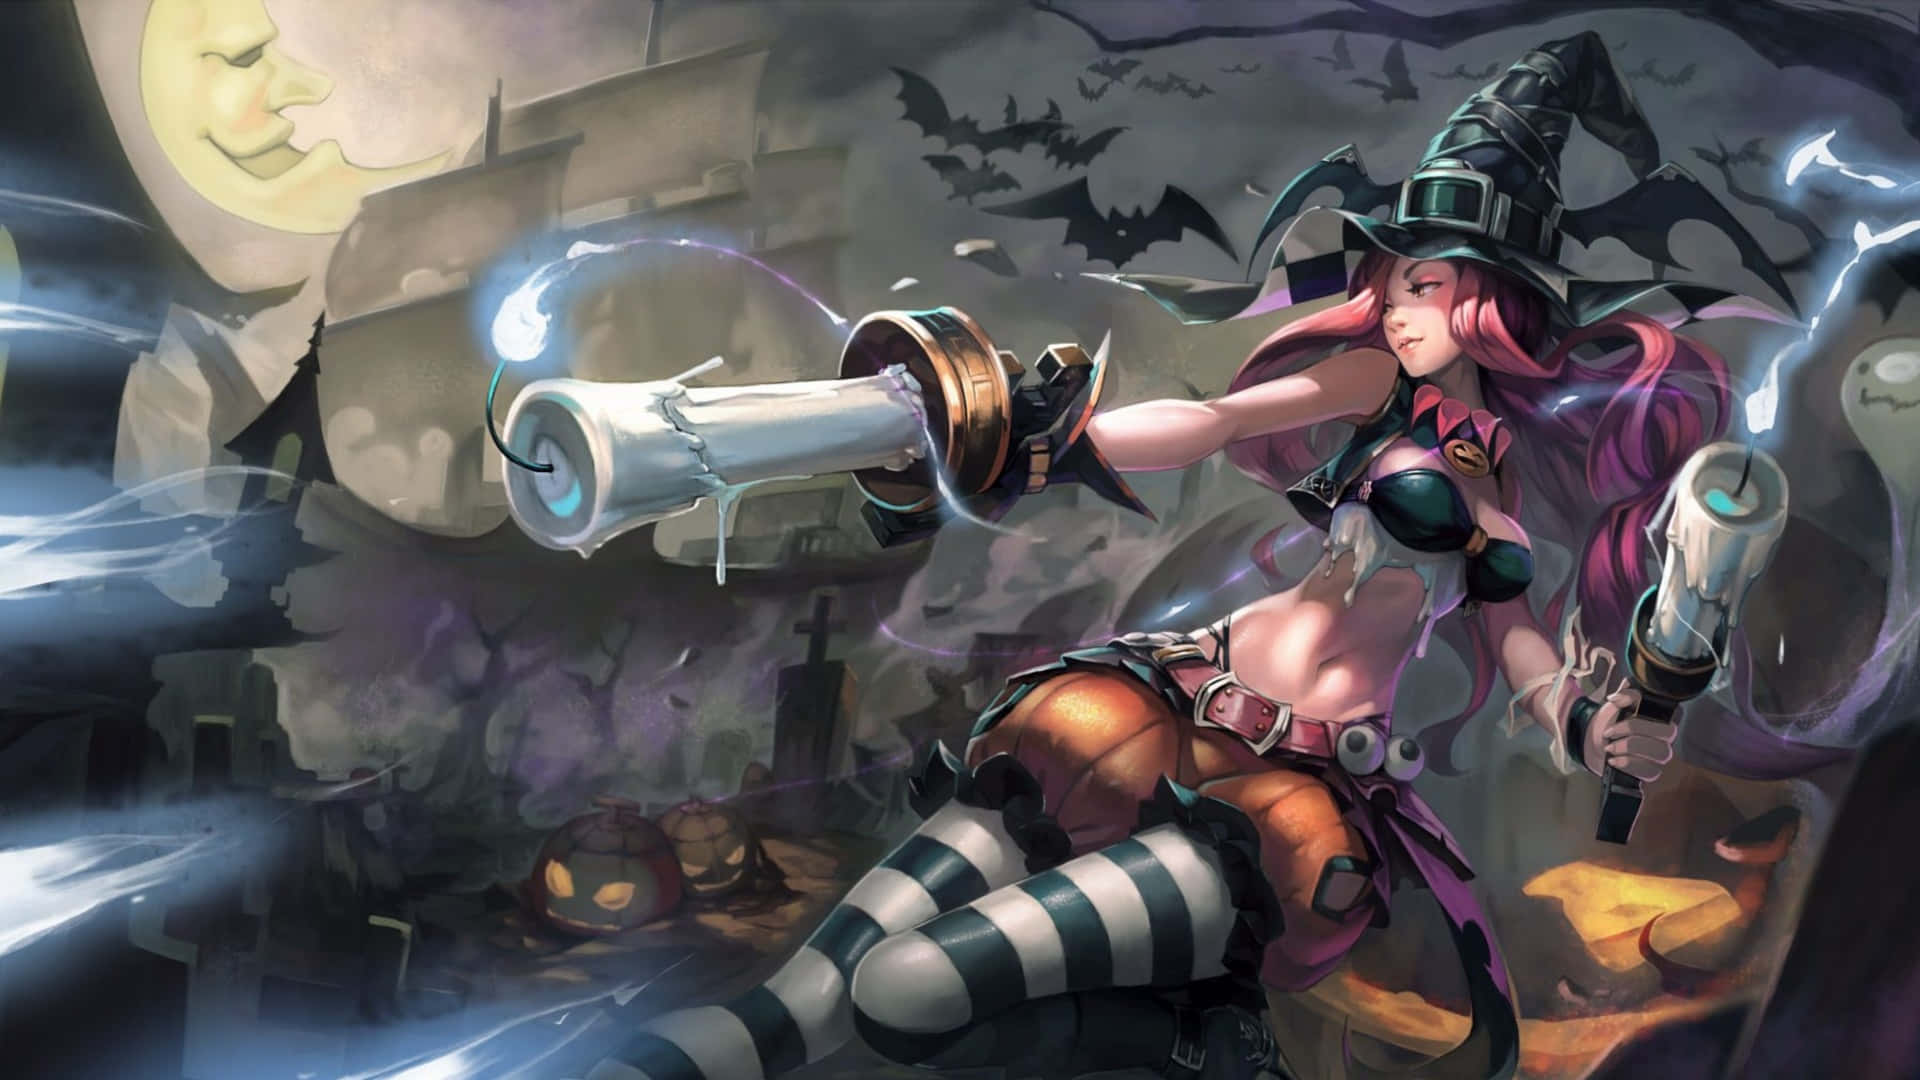 Join the Epic Battlegrounds of Runeterra with League of Legends